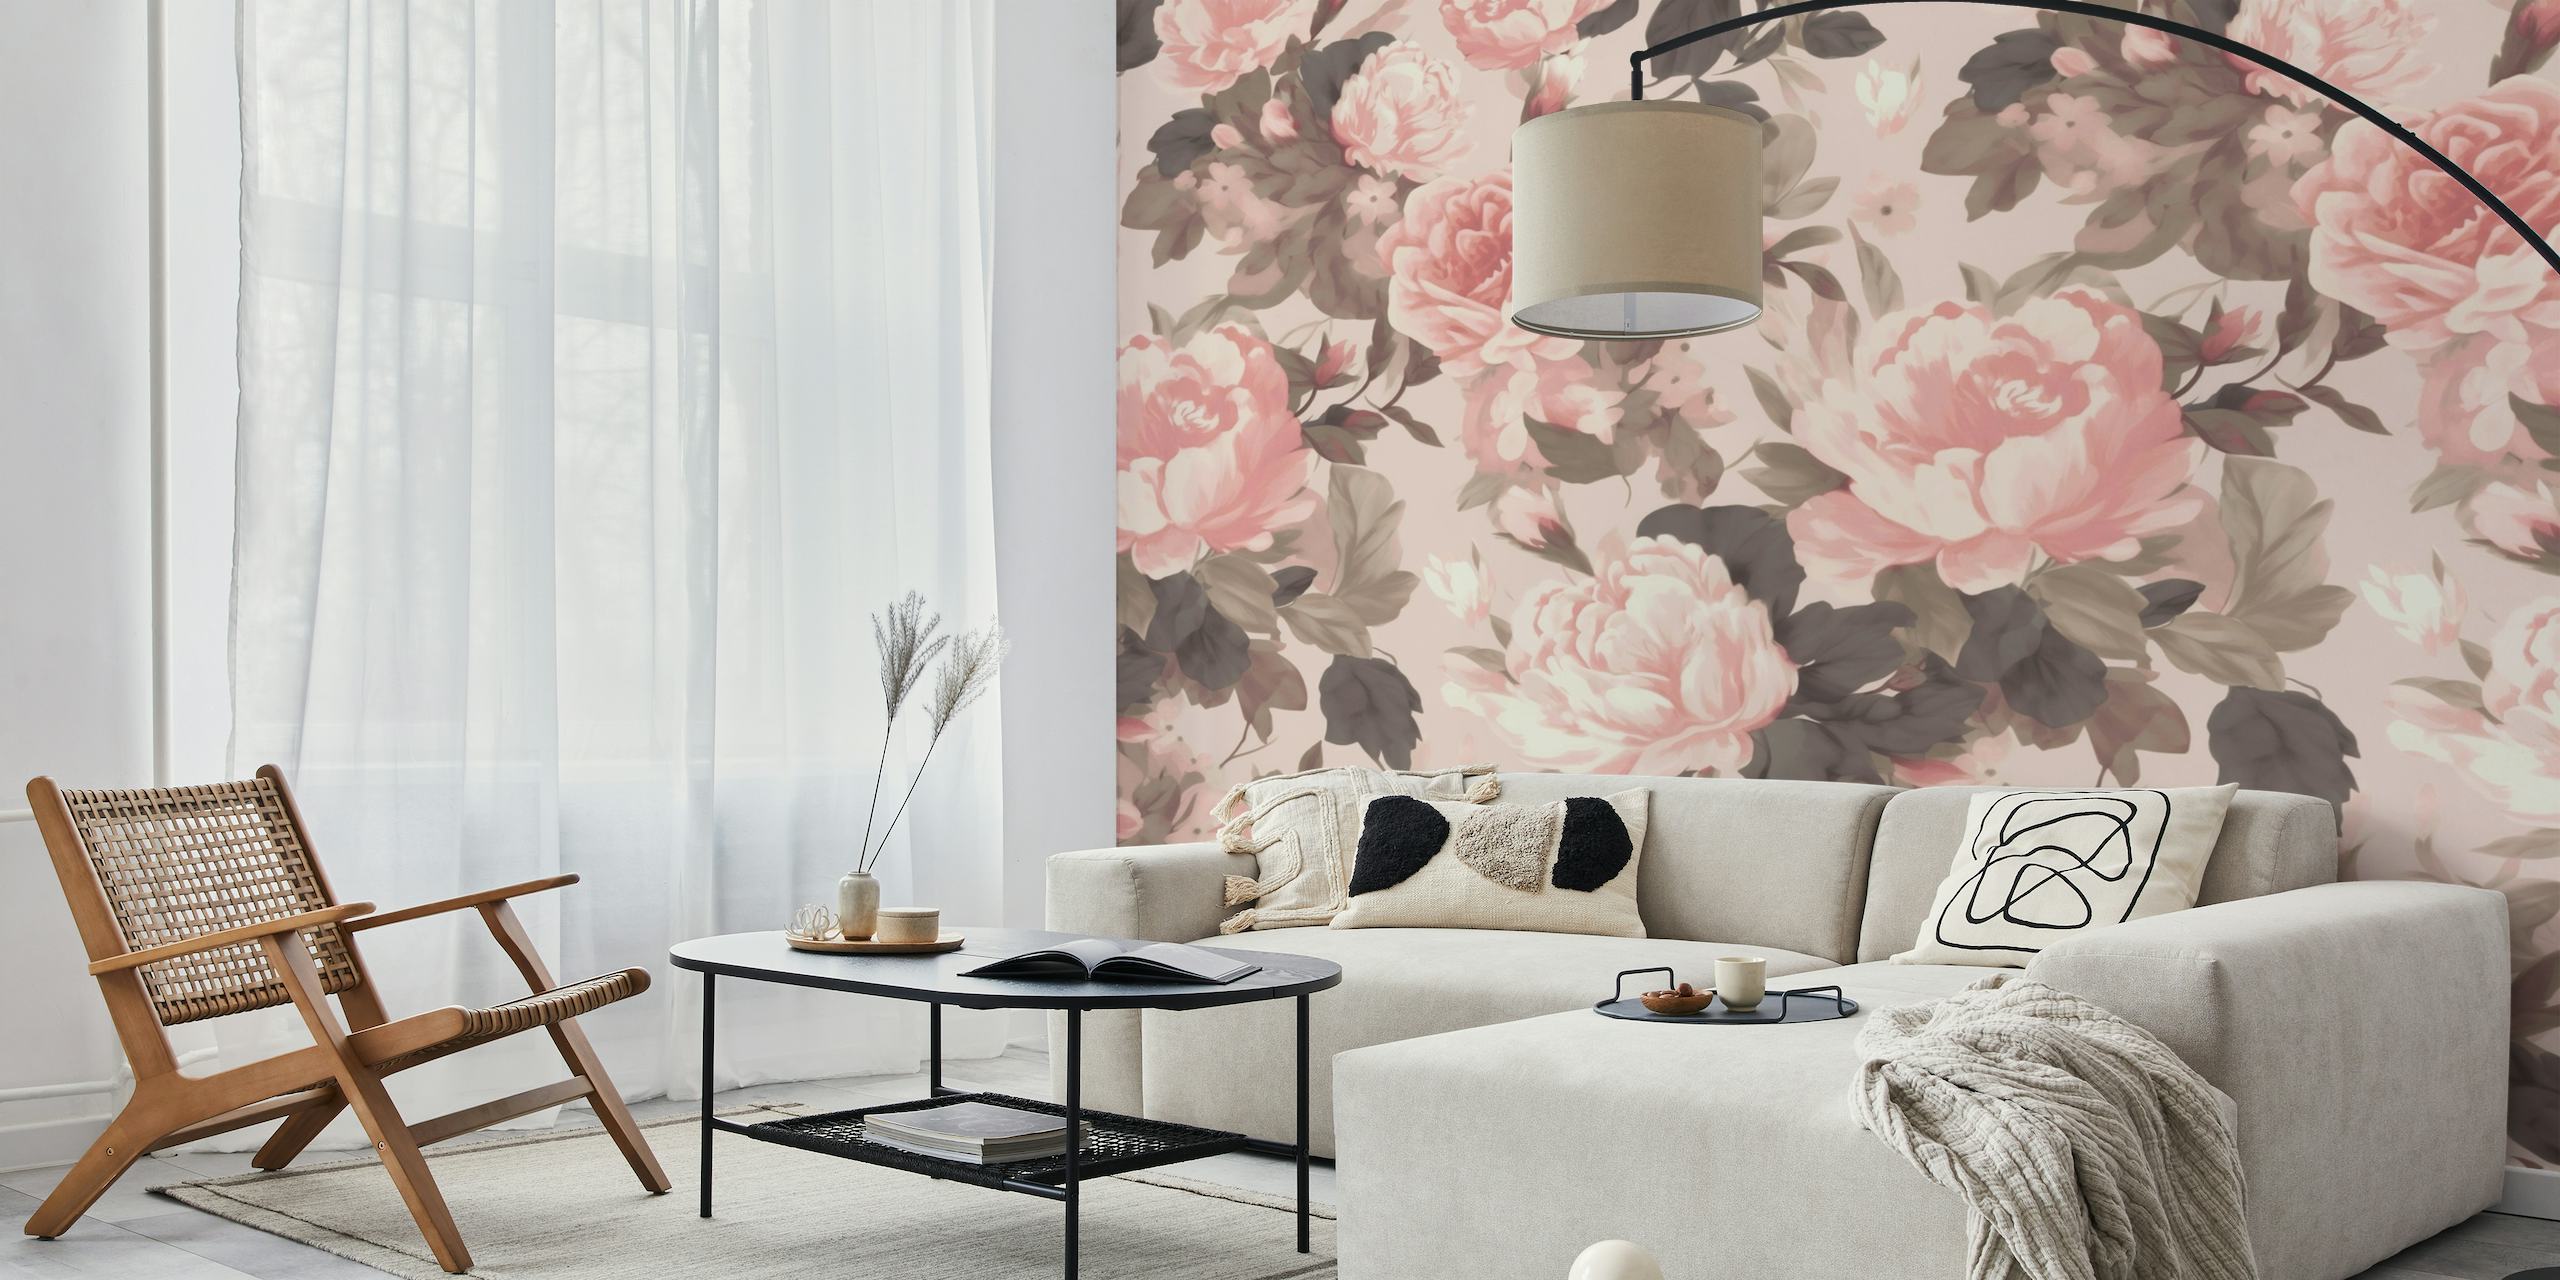 Baroque Roses Floral Nostalgia Moody Blush Colors behang